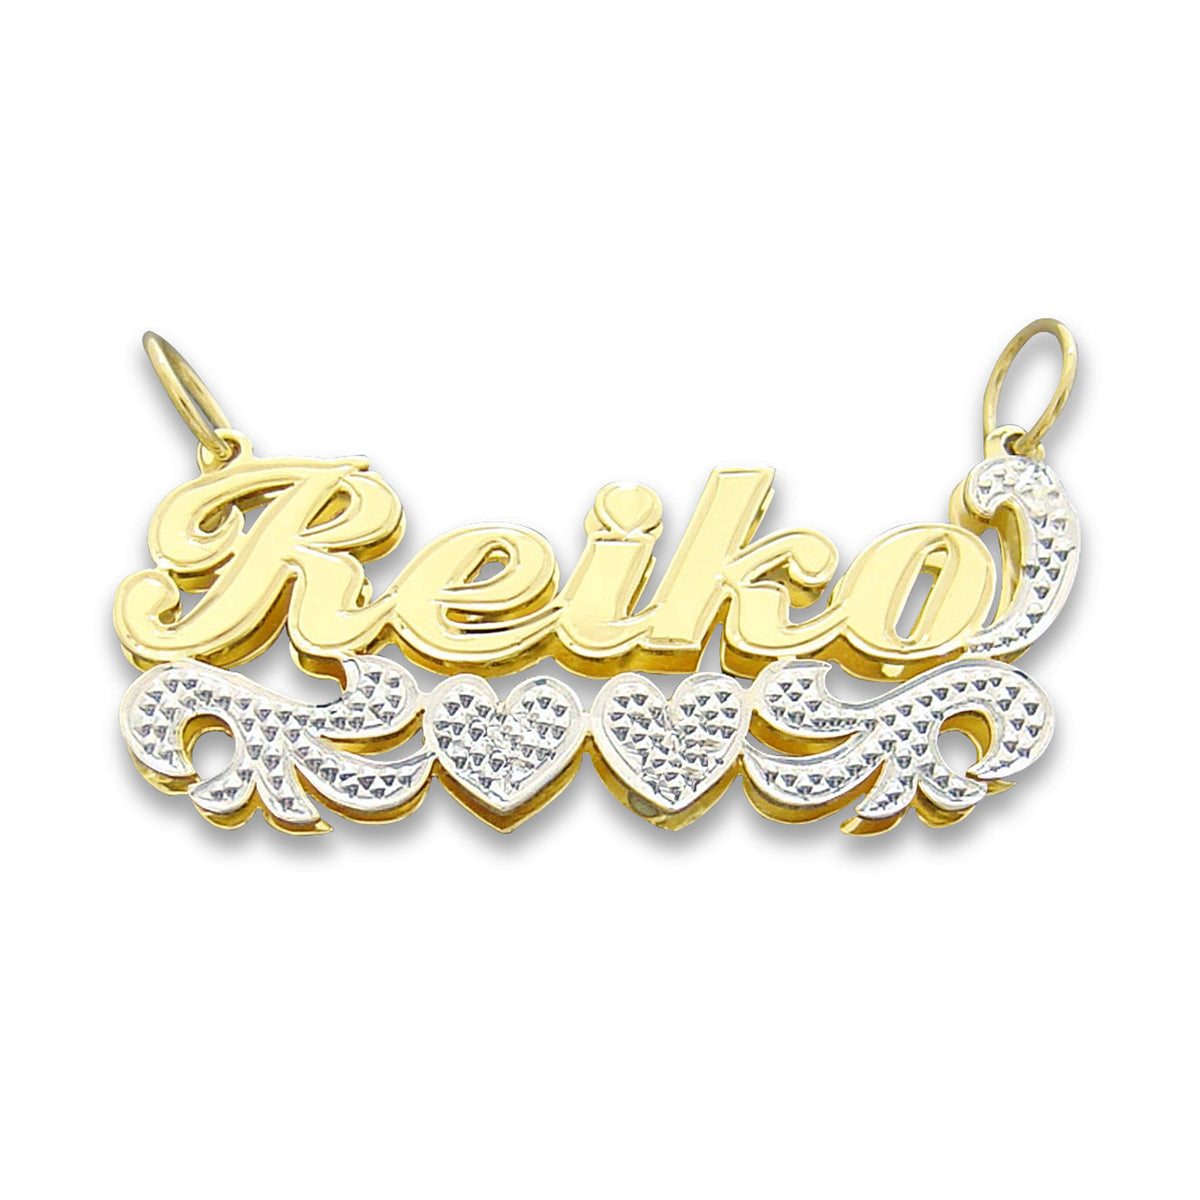 Small Personalized Necklace 10k or 14k Gold 3D Double Plate Name Pendant Charm 2 Hearts Underneath Iced Out Fine Jewelry ND11